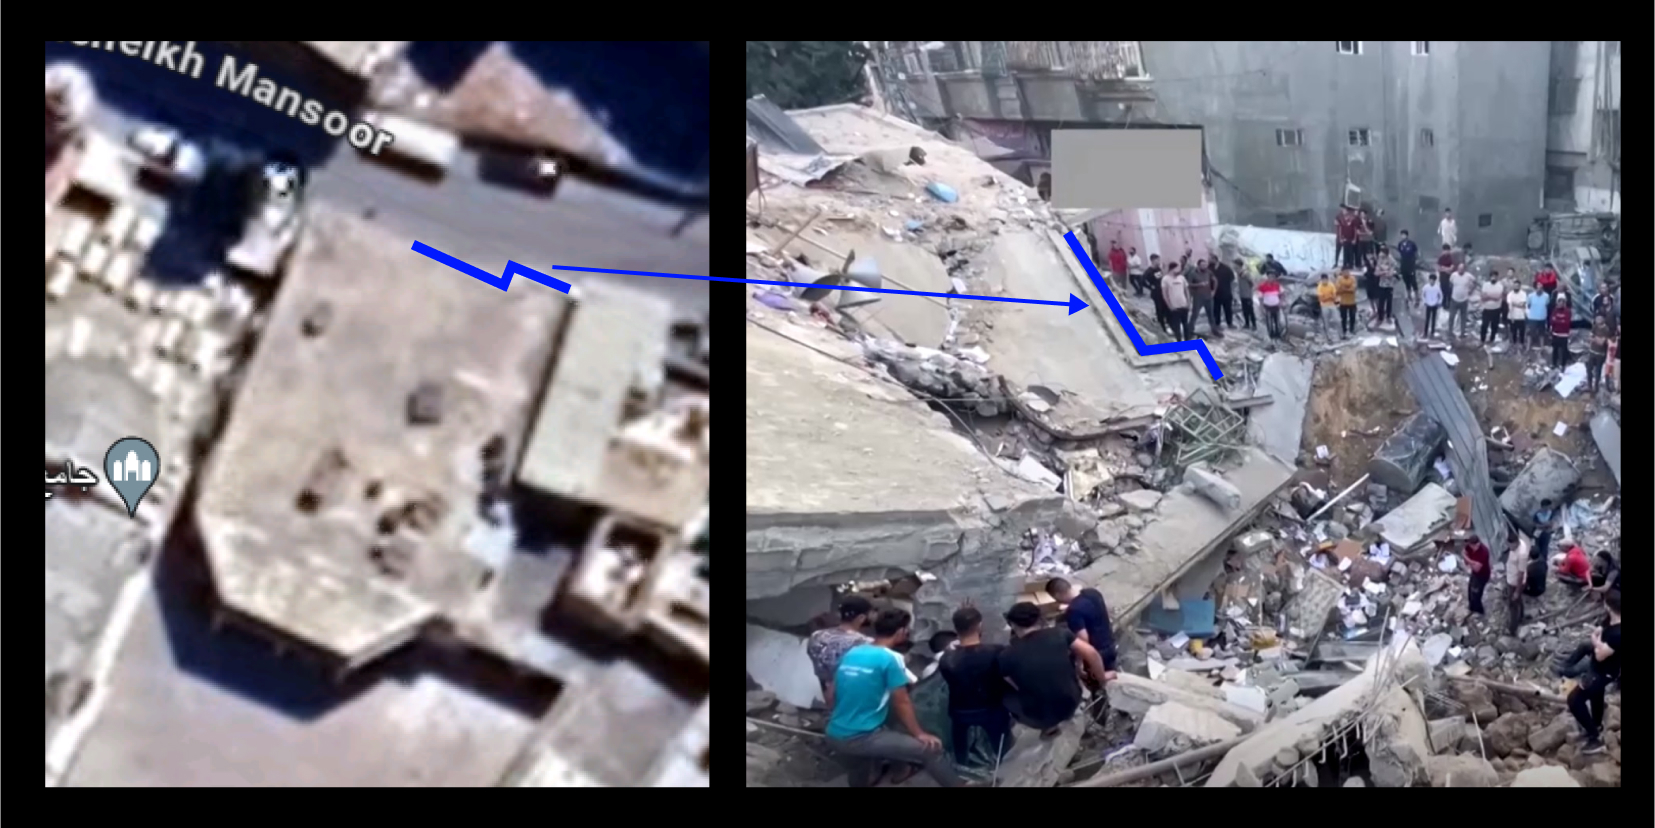 Left: A satellite image. Right: A screenshot of a video showing a collapsed building.